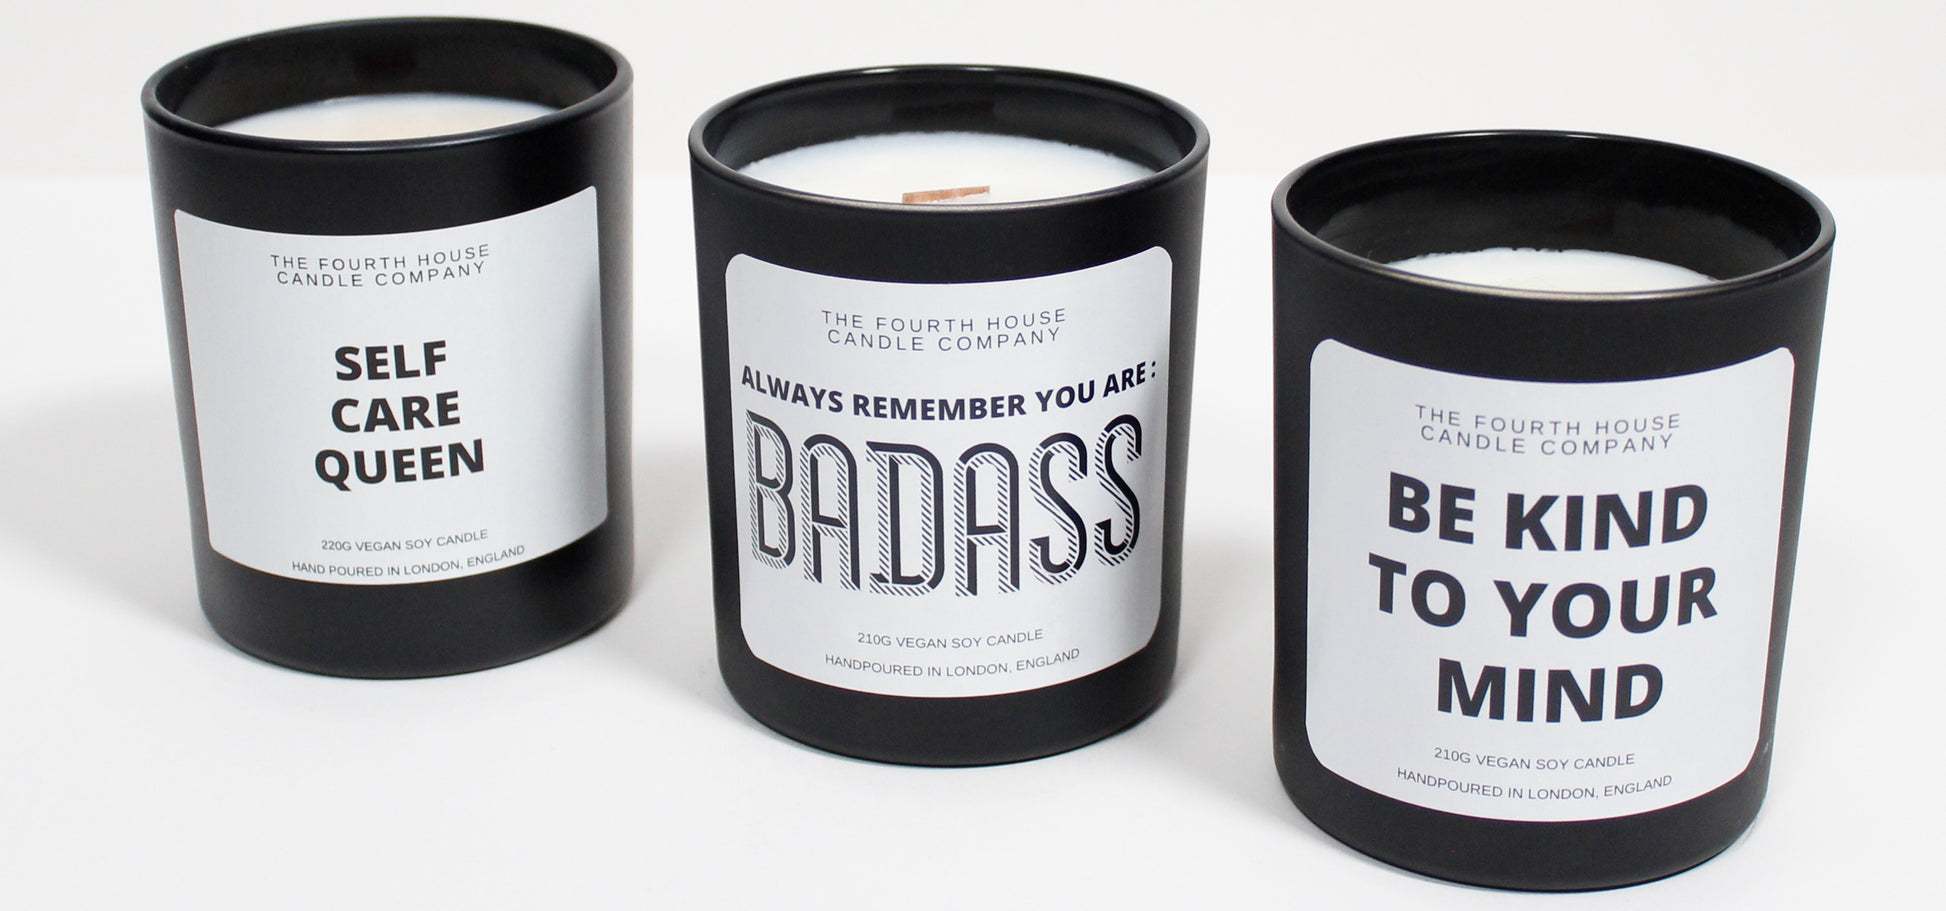 Badass - Soy Wax Candle with Cracking Wood Wick. 220g - Long Lasting. UK made, clean burning and eco - friendly.